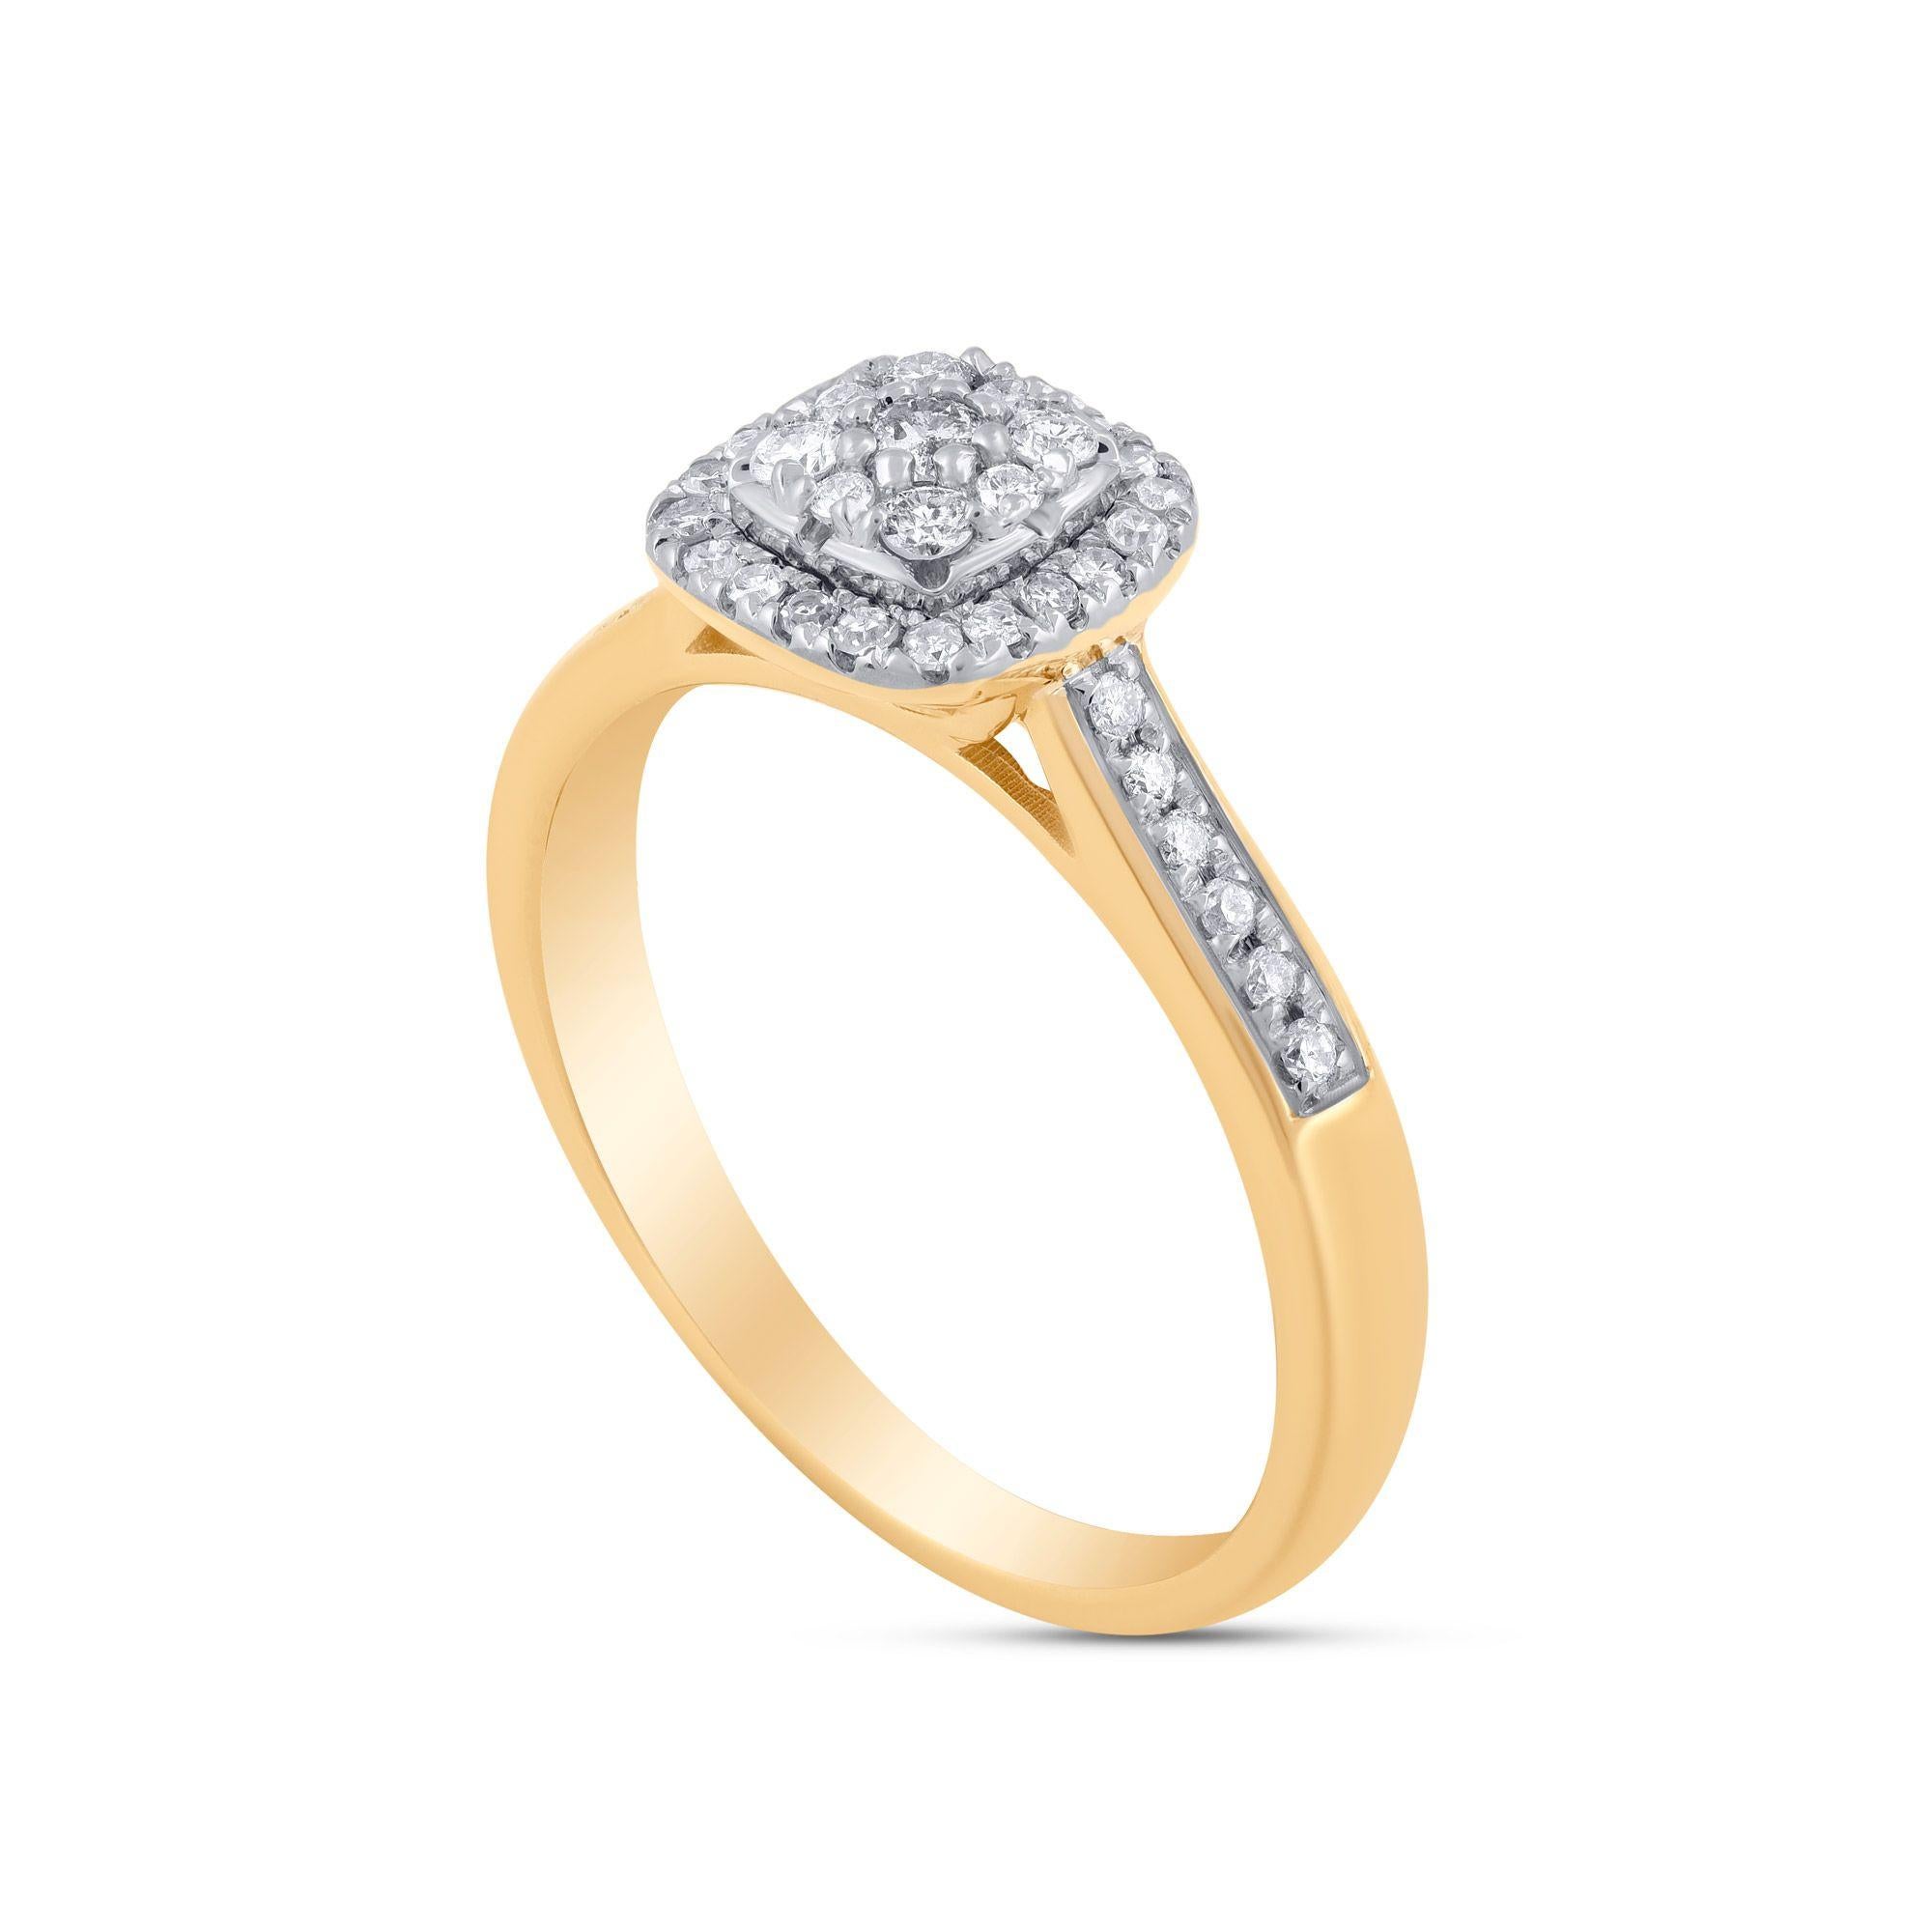 Dazzling ring studded with 41 diamonds in prong and micro pave setting. Crafted in 10kt gold, diamonds are graded H-I Color, I2-I3 Clarity. 
